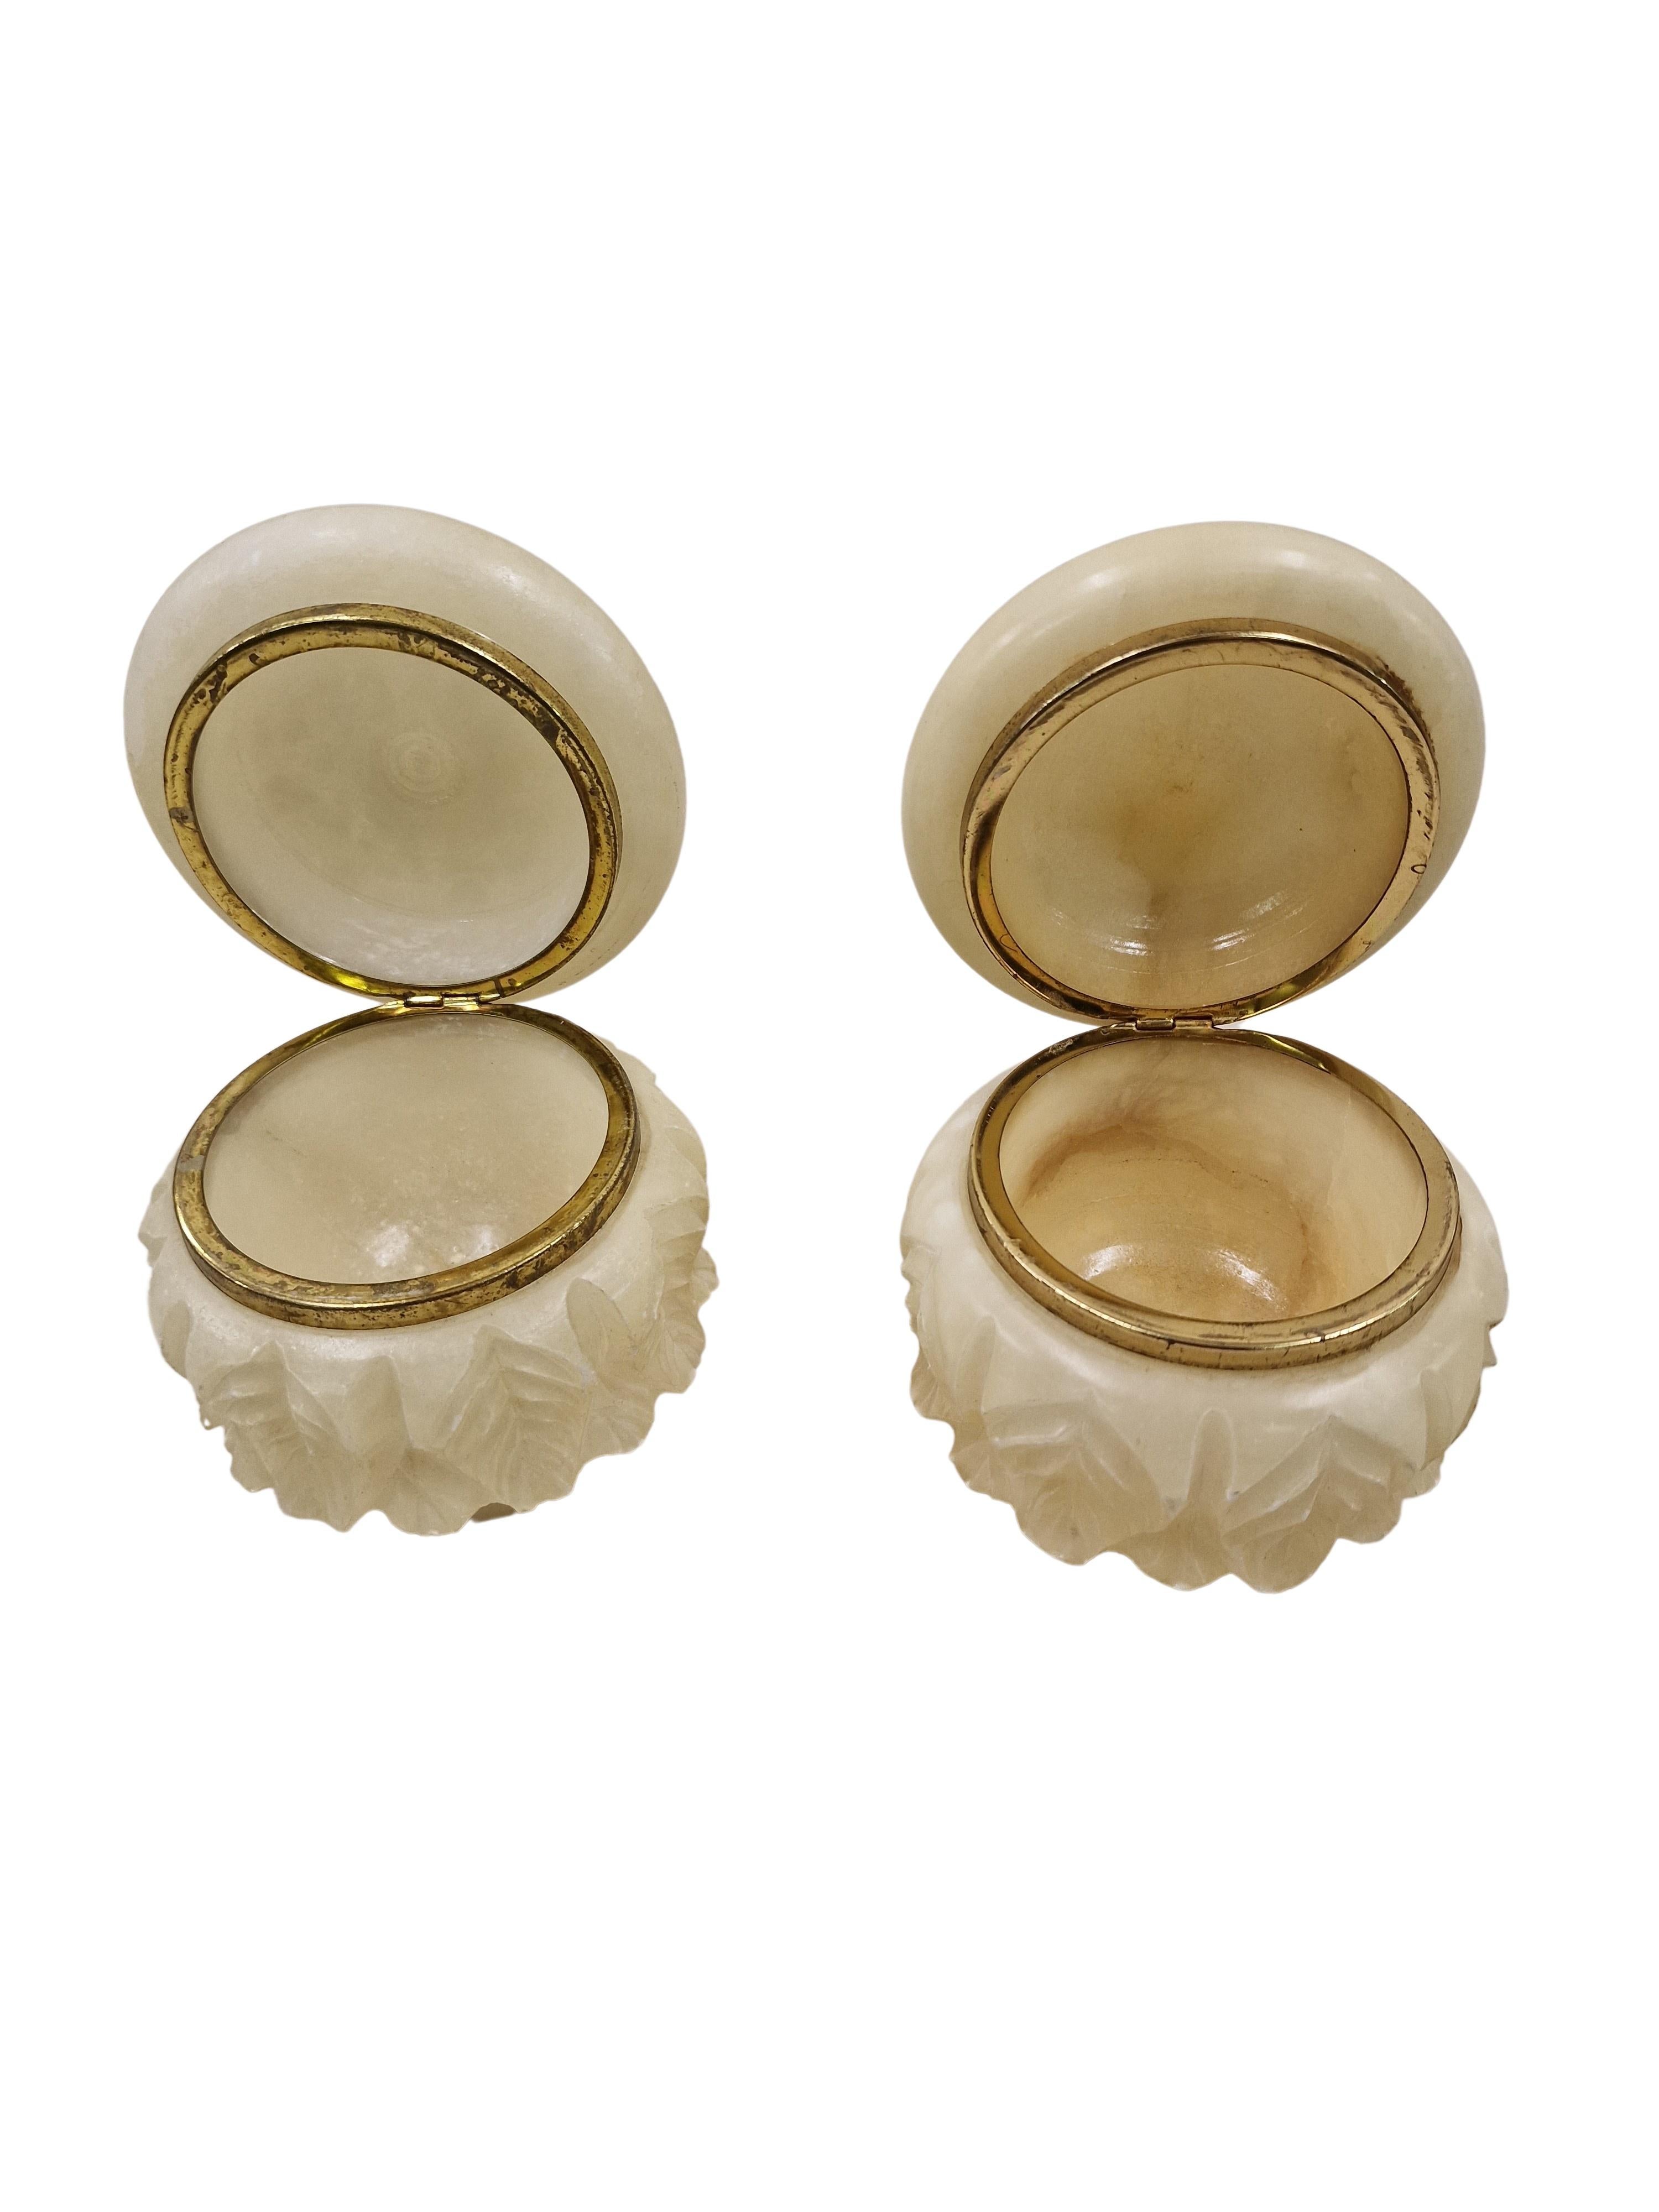 Pair of perfectly hand-cut lidded boxes out of white alabaster, made in the 1920s, in Italy. 
These objects have a round basic shape, but they have a cuff all around that is designed in the form of leaves. All hand carved into the alabaster. The